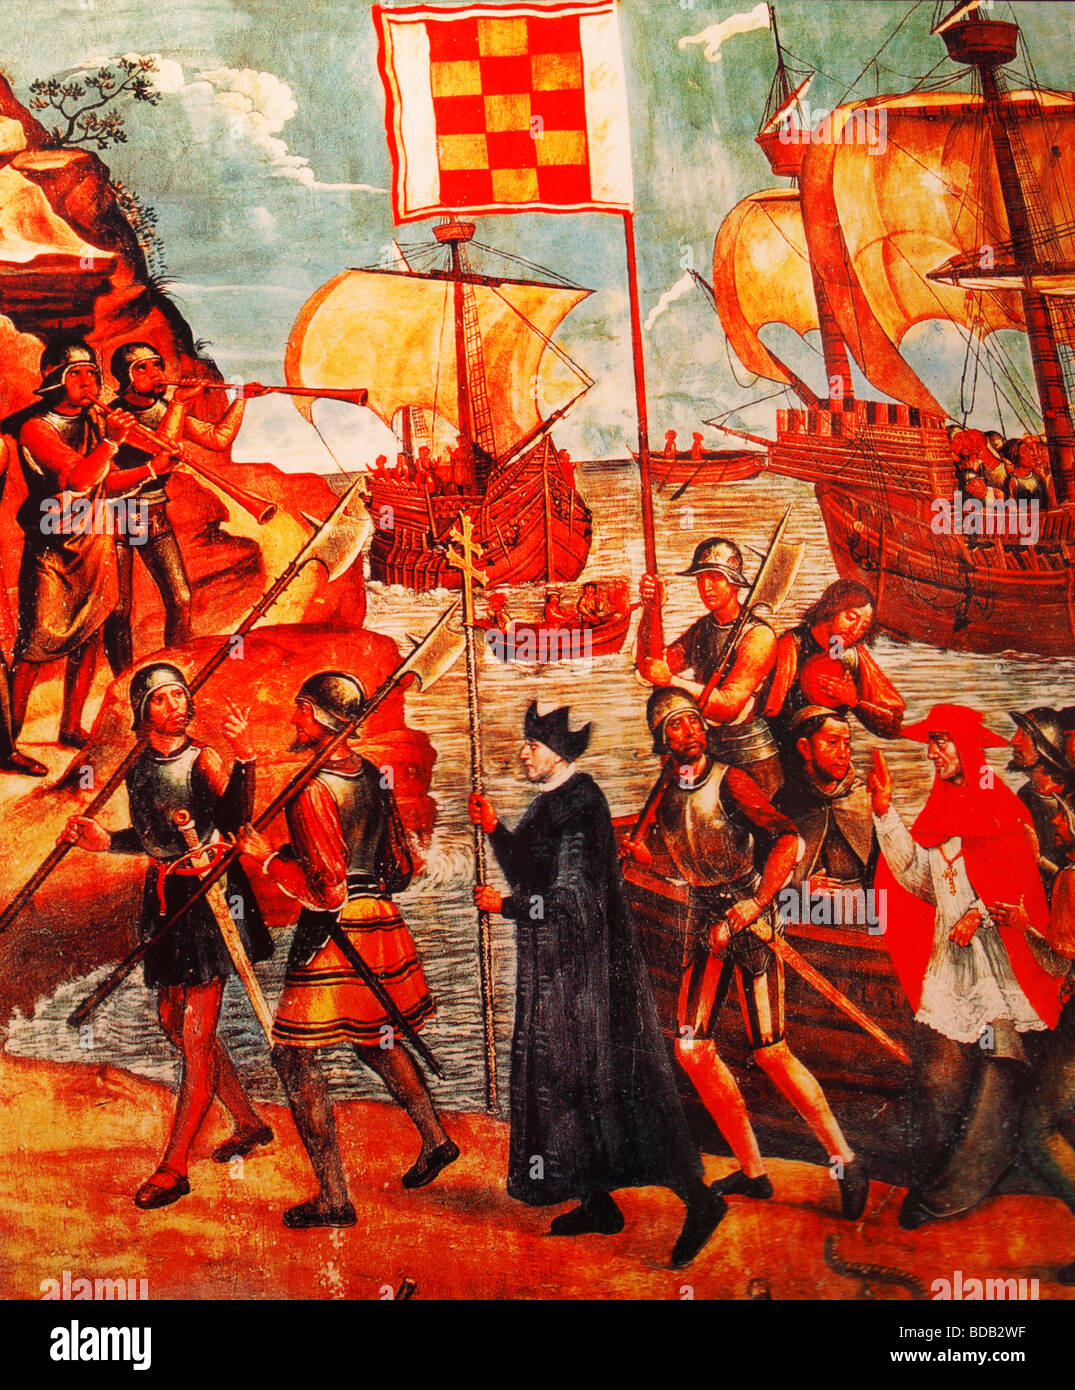 Painting depicting Spanish conquistadors landing on foreign soil Stock Photo